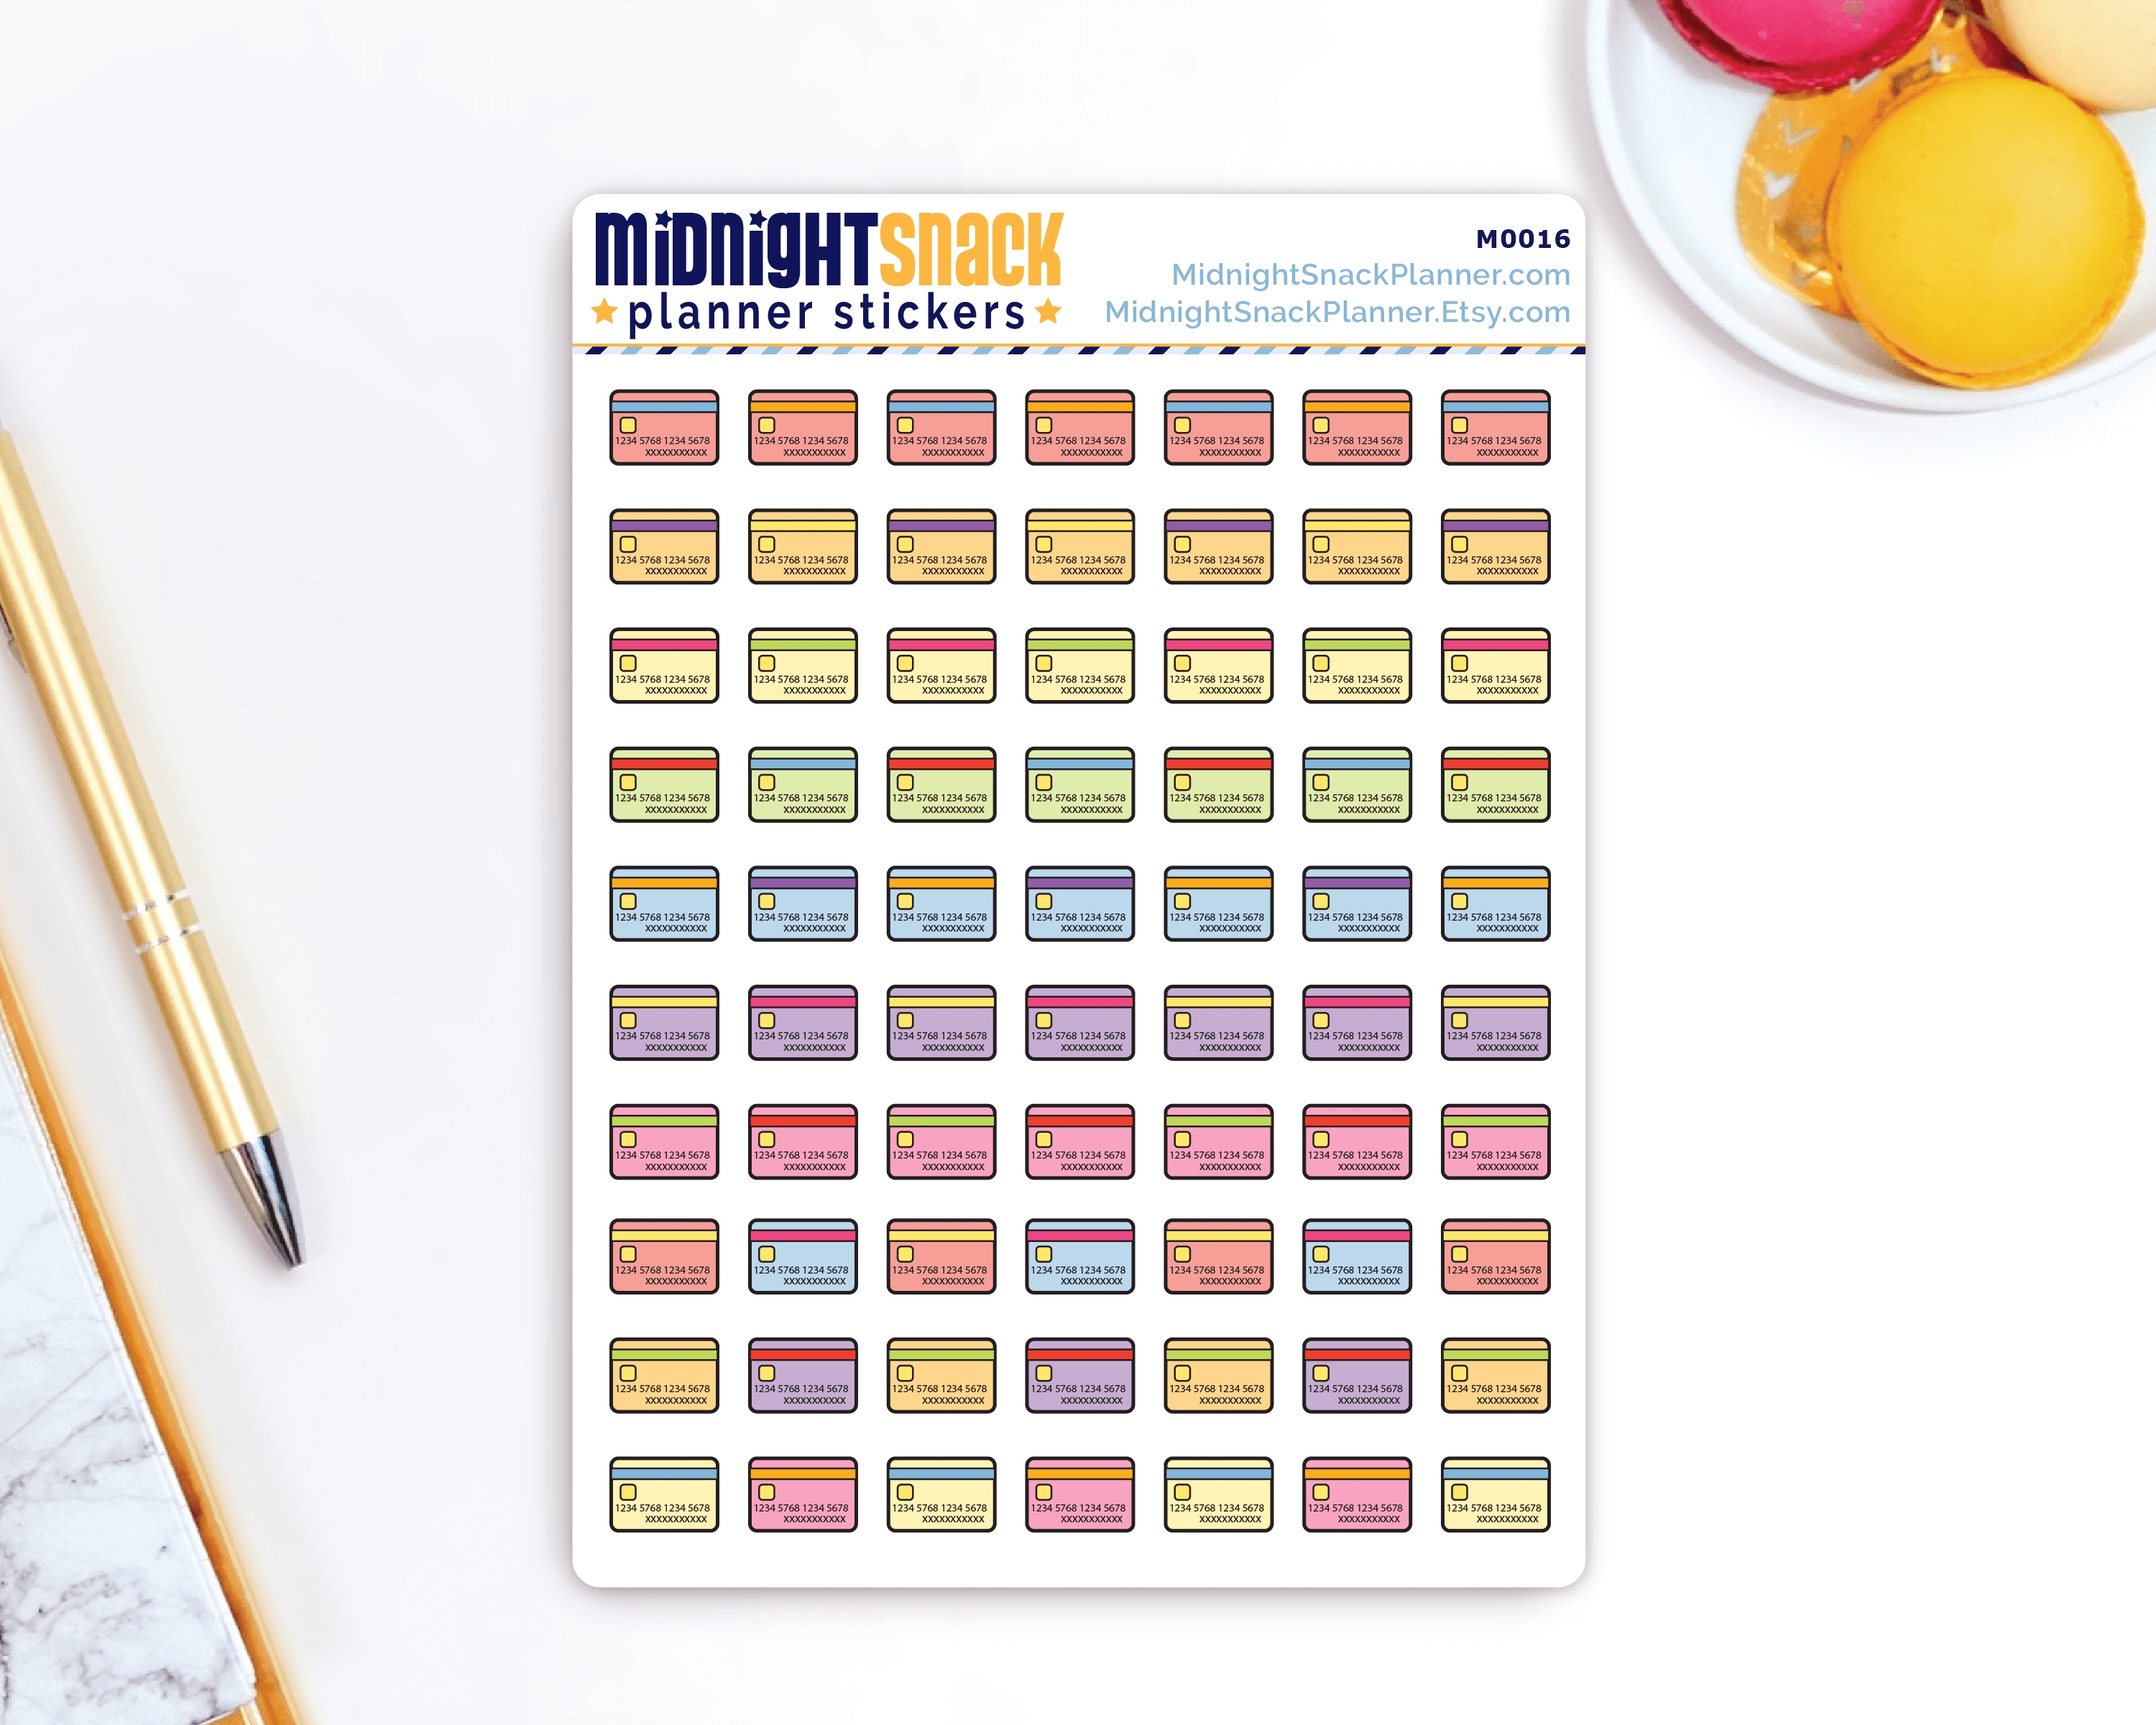 Credit Card Icon: Credit Card Bill Planner Stickers: Midnight Snack Planner Stickers